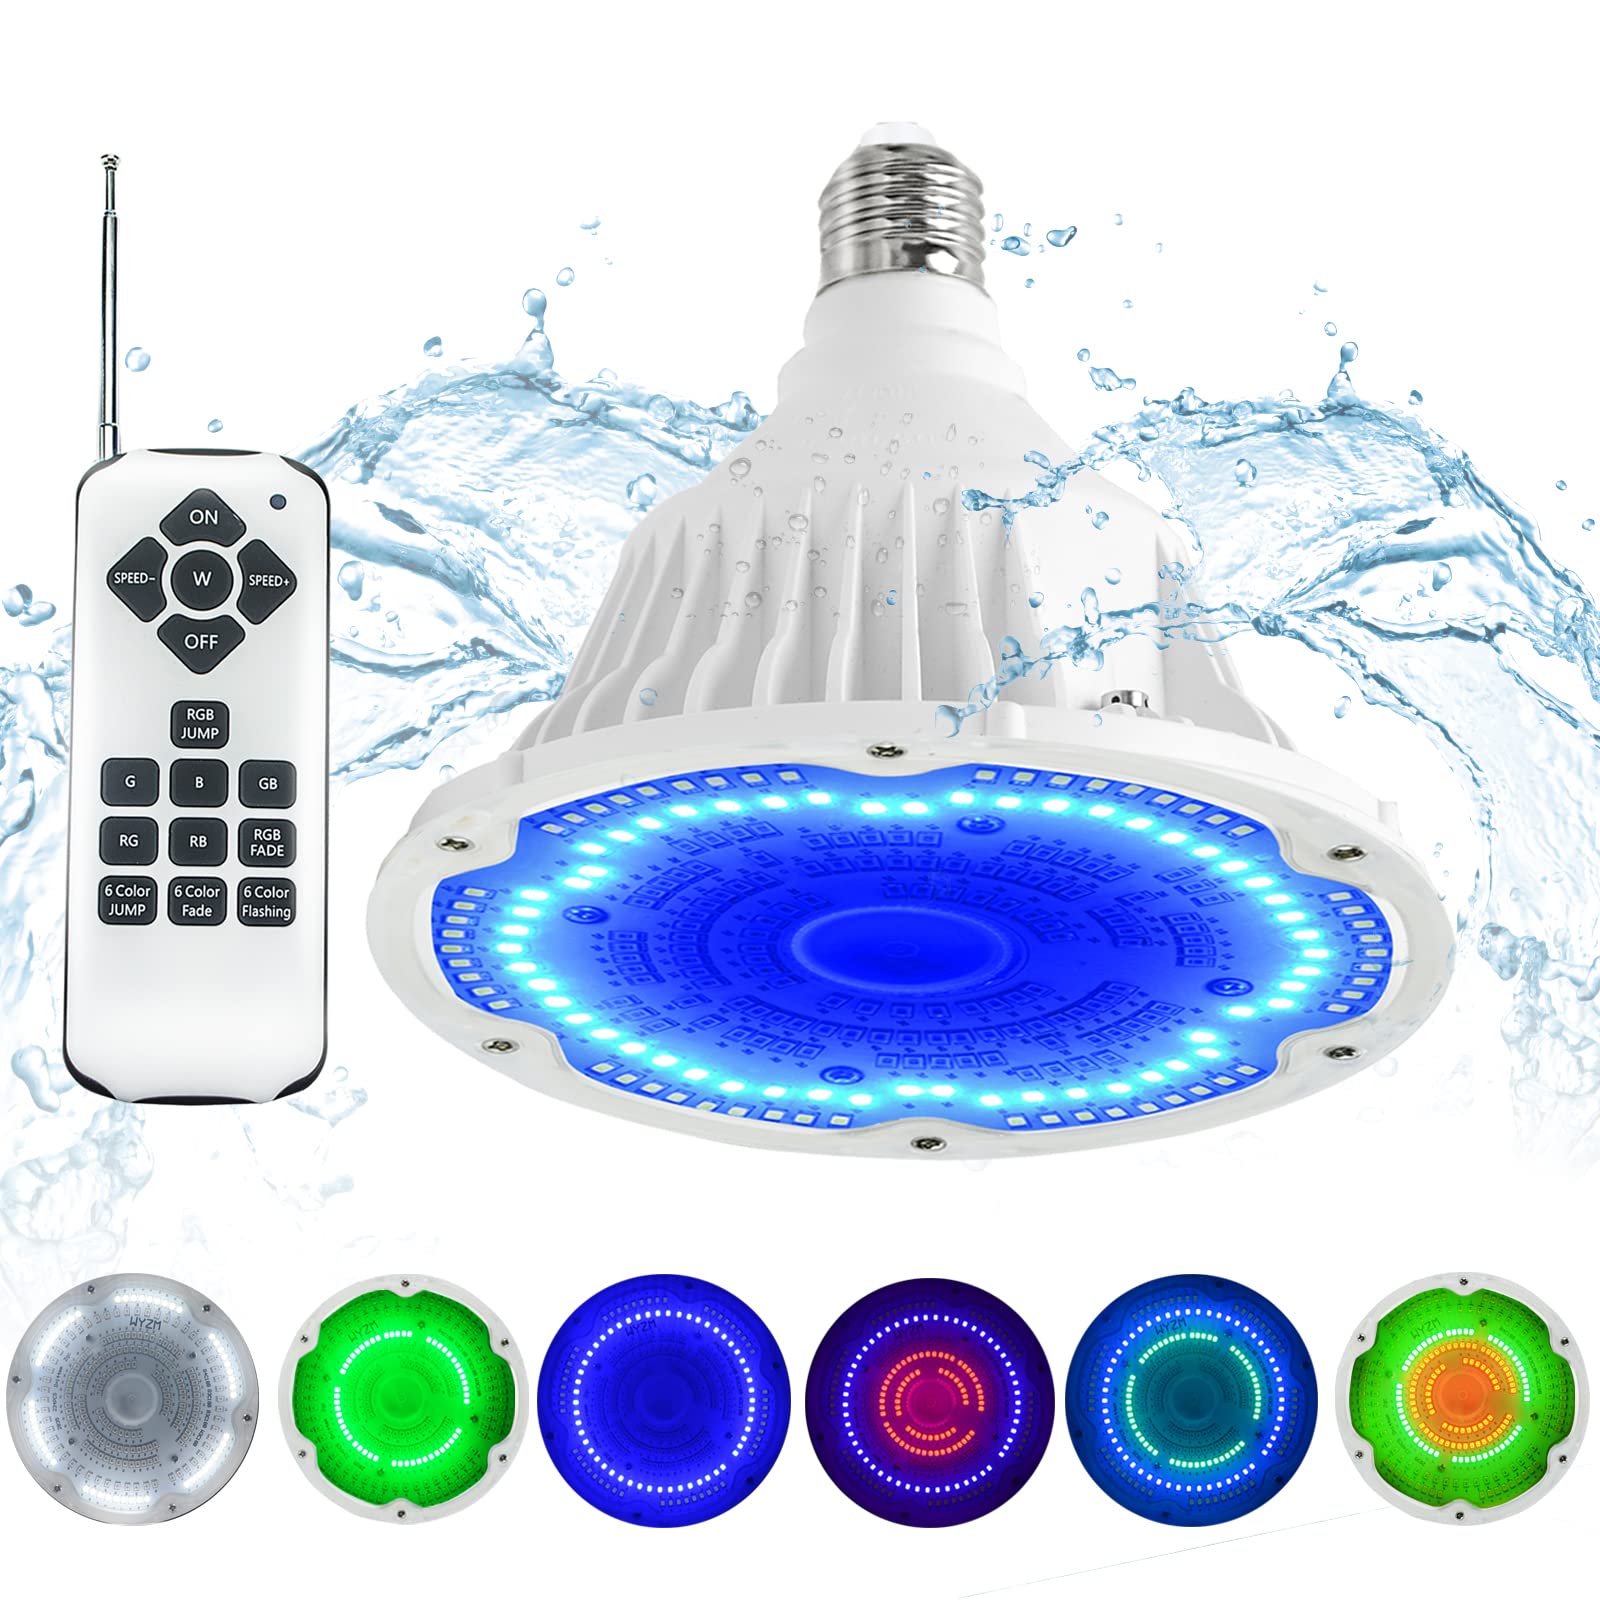 WYZM LED Swimming Pool Light Bulb for Pentair Hayward Light Fixture120Vwith RemoteIP68 Waterproof